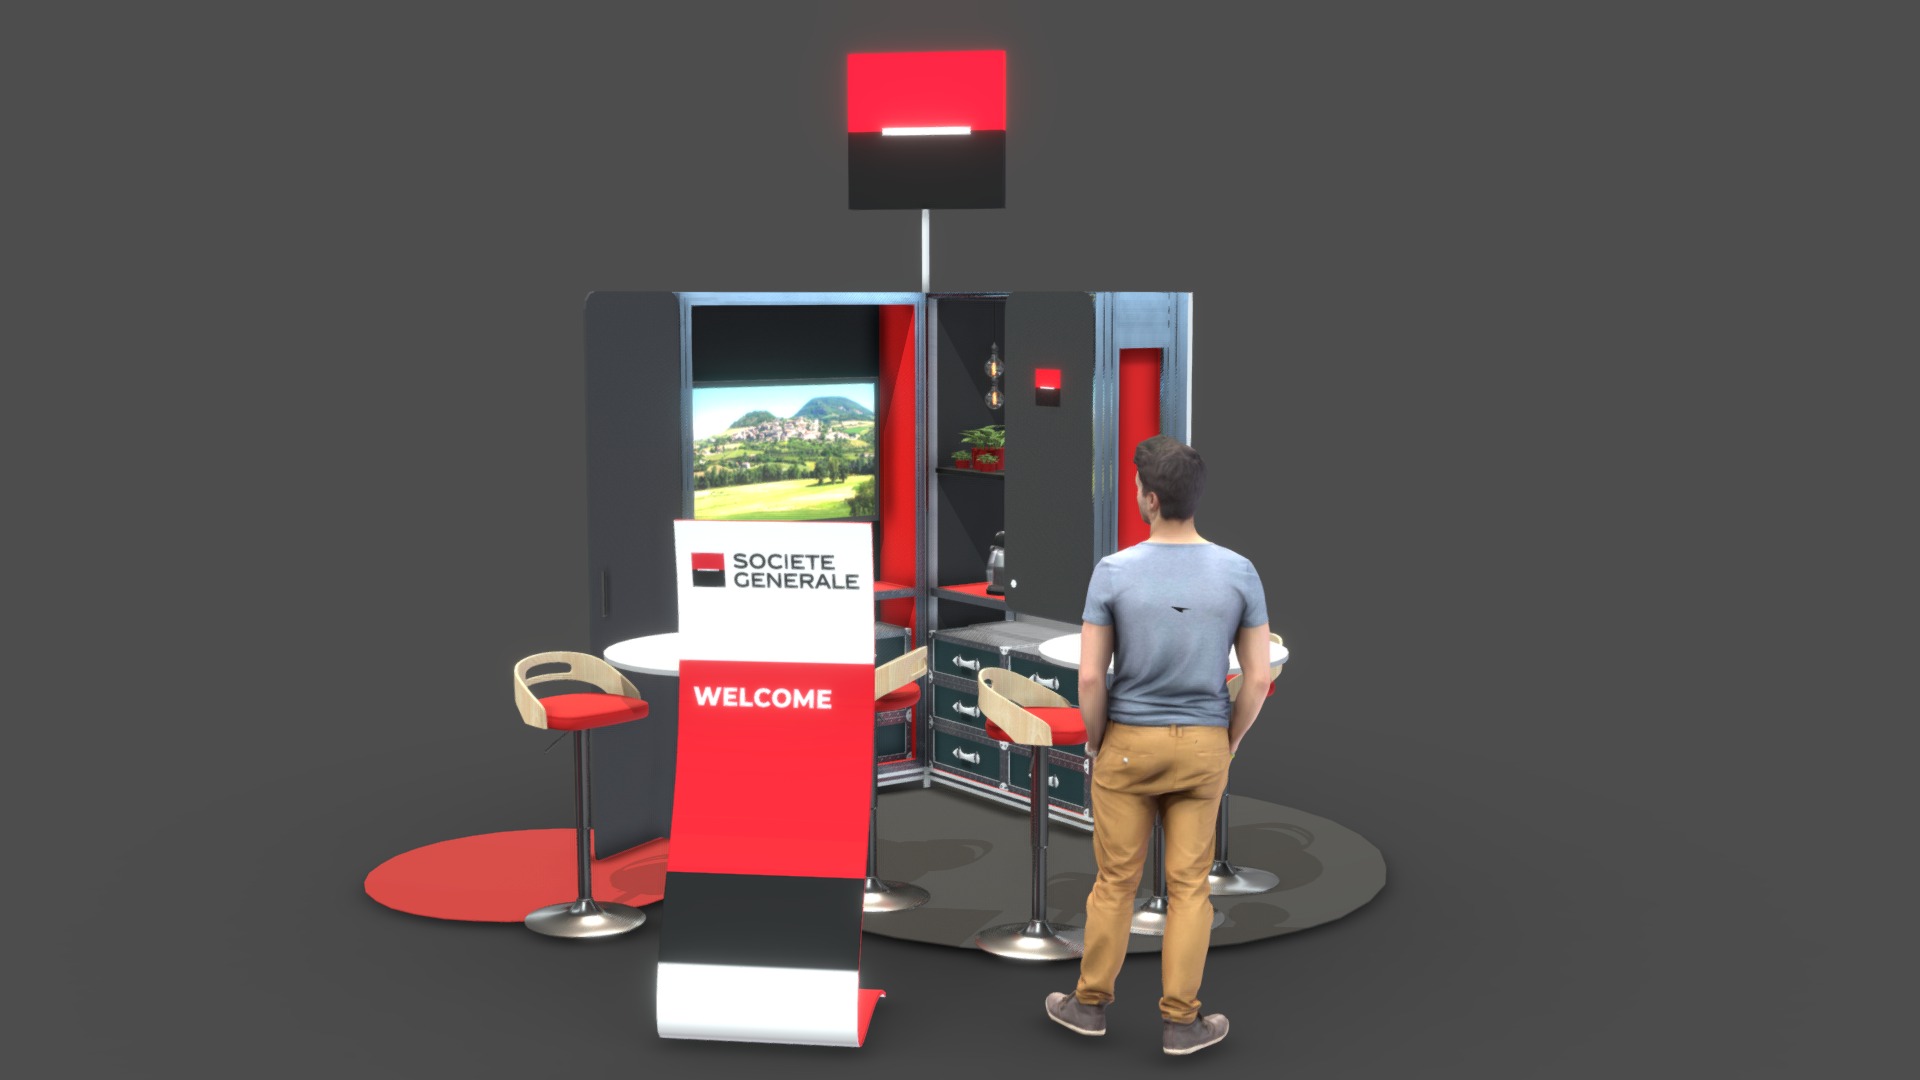 3D model Stand Société générale 9 m² - This is a 3D model of the Stand Société générale 9 m². The 3D model is about a person standing in front of a display.